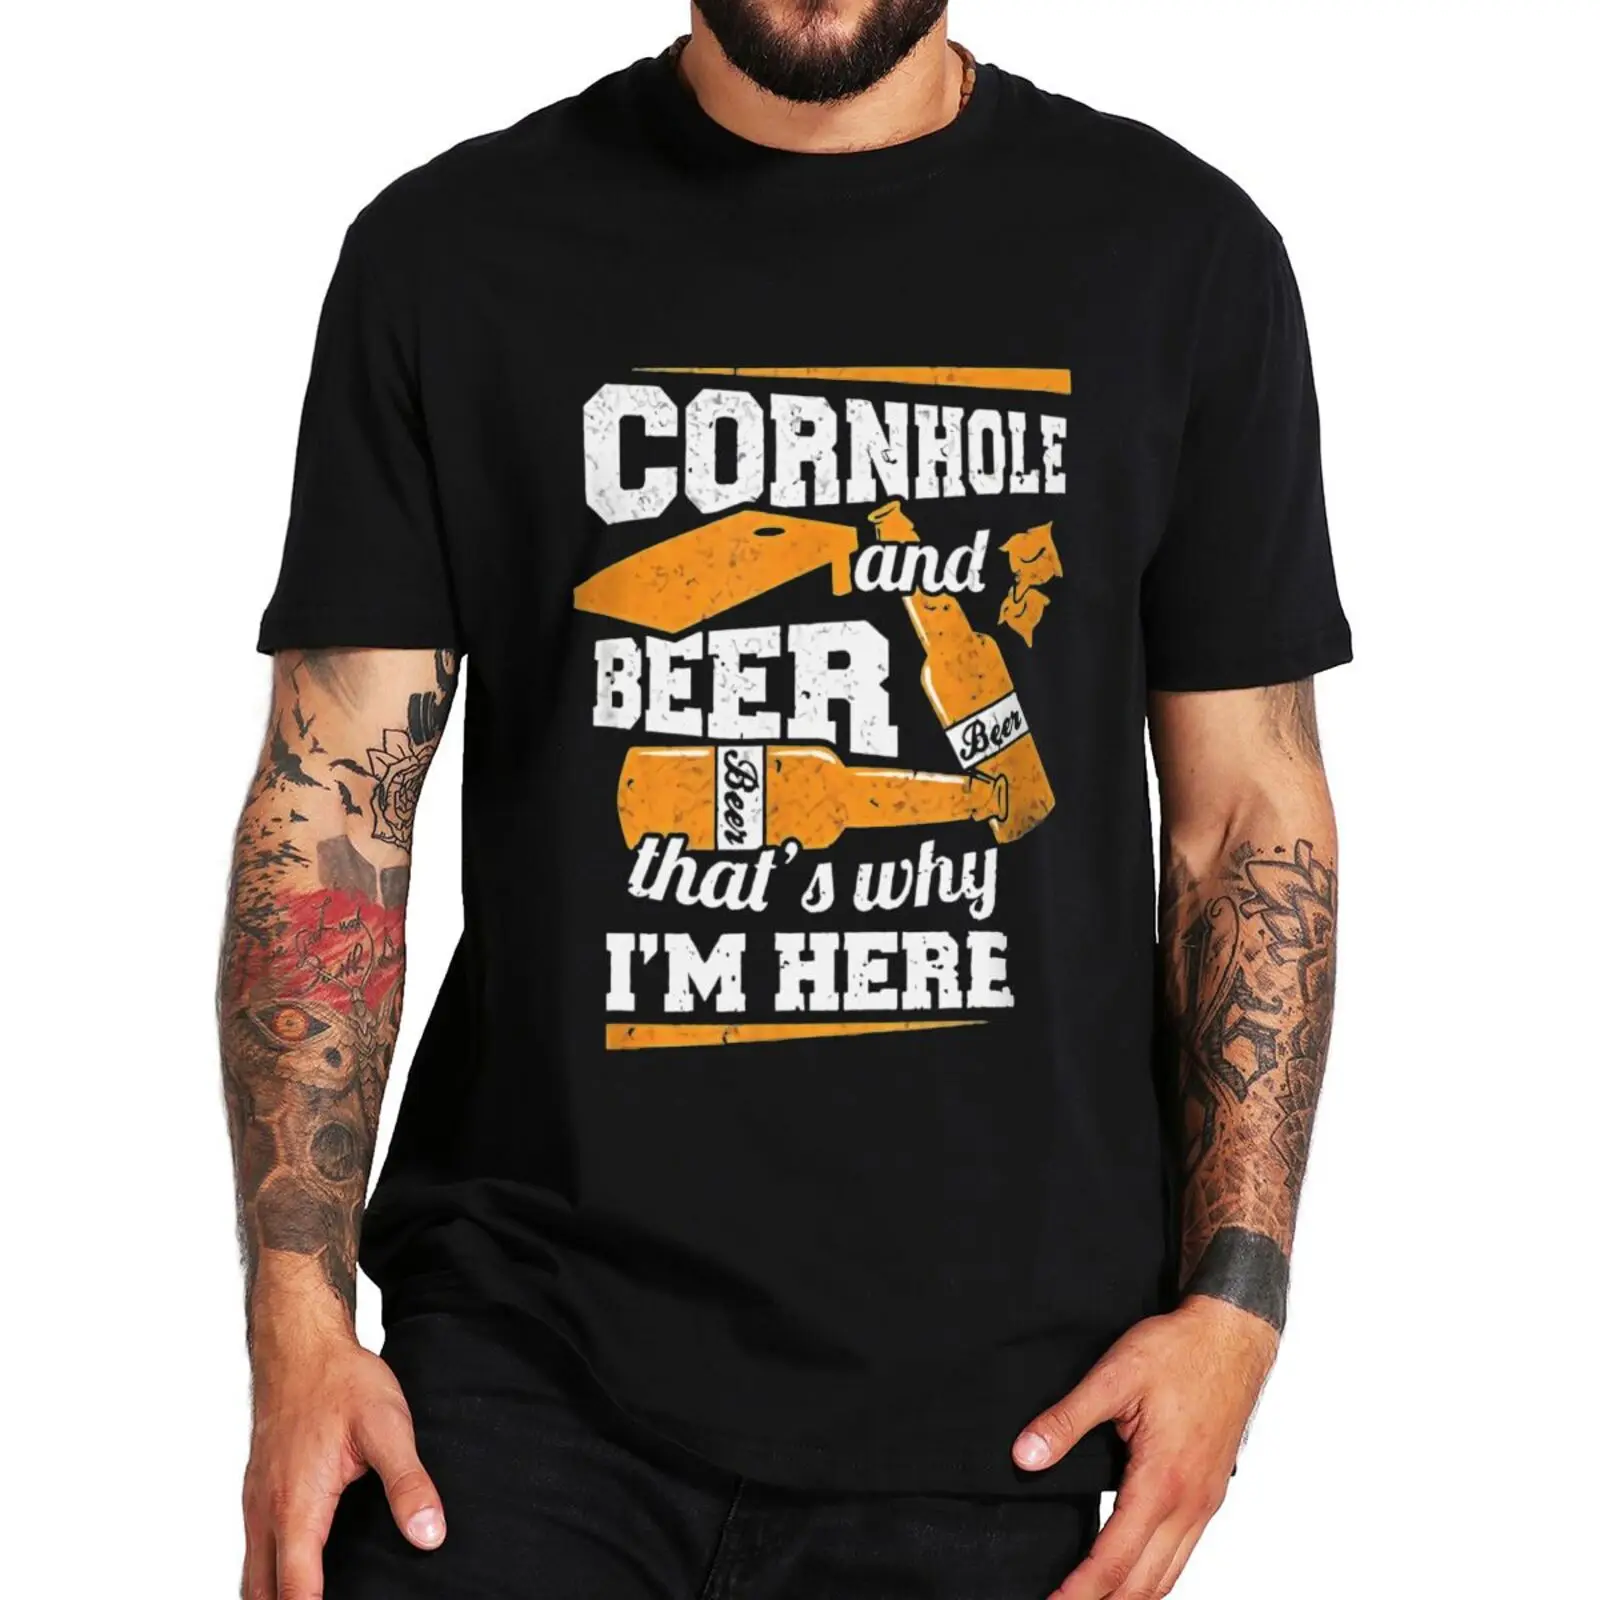 

Cornhole And Beer That's Why I'm Here T Shirt Funny Cornhole Sports Lovers Gift Tops Unisex Casual 100% Cotton T-shirt EU Size